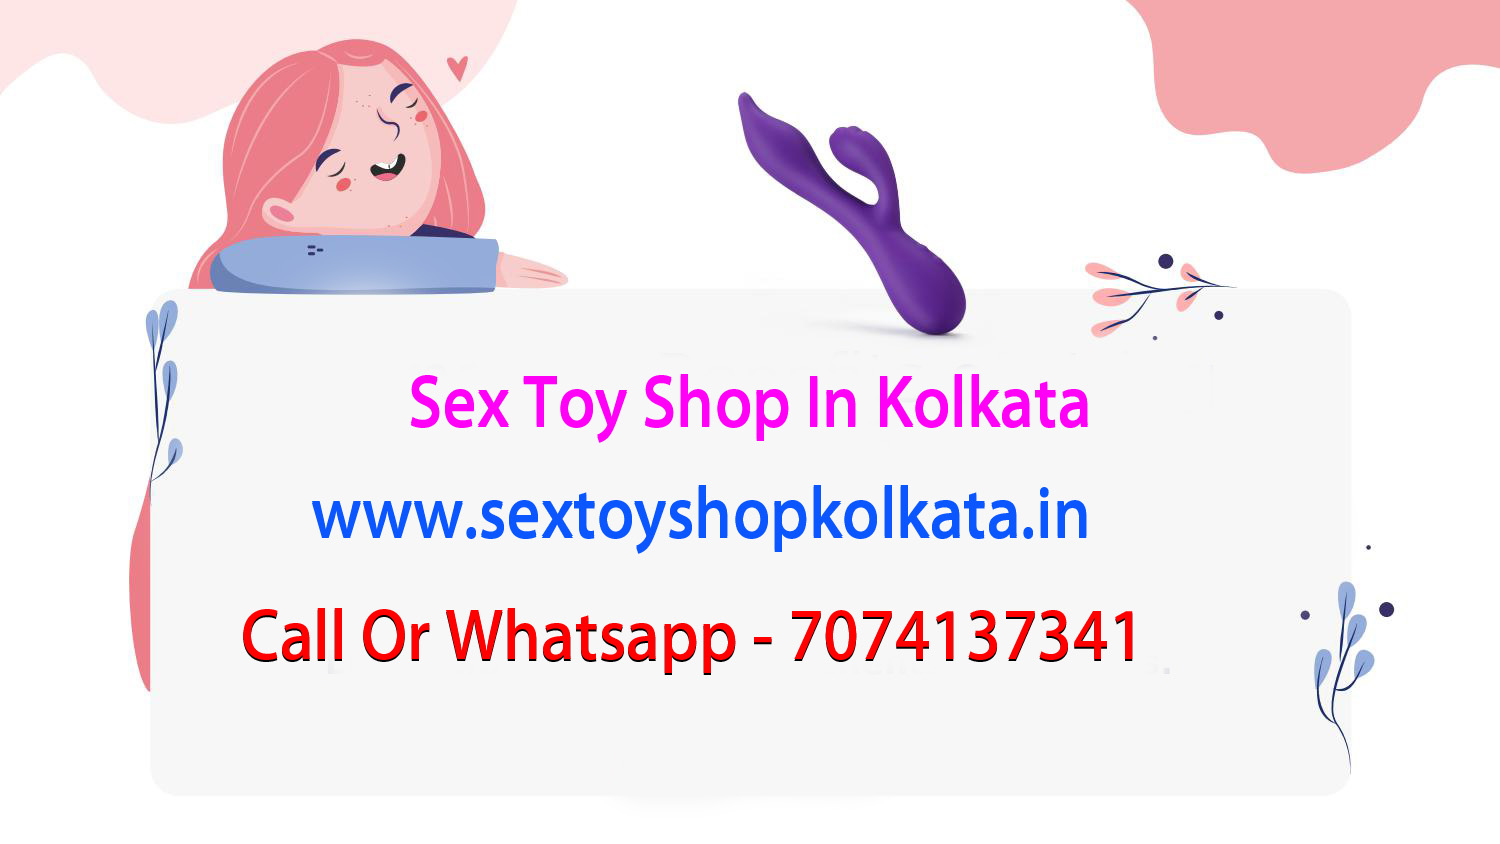 Buy Same Day Sextoys In Kolkata | Hand To Hand Delivery